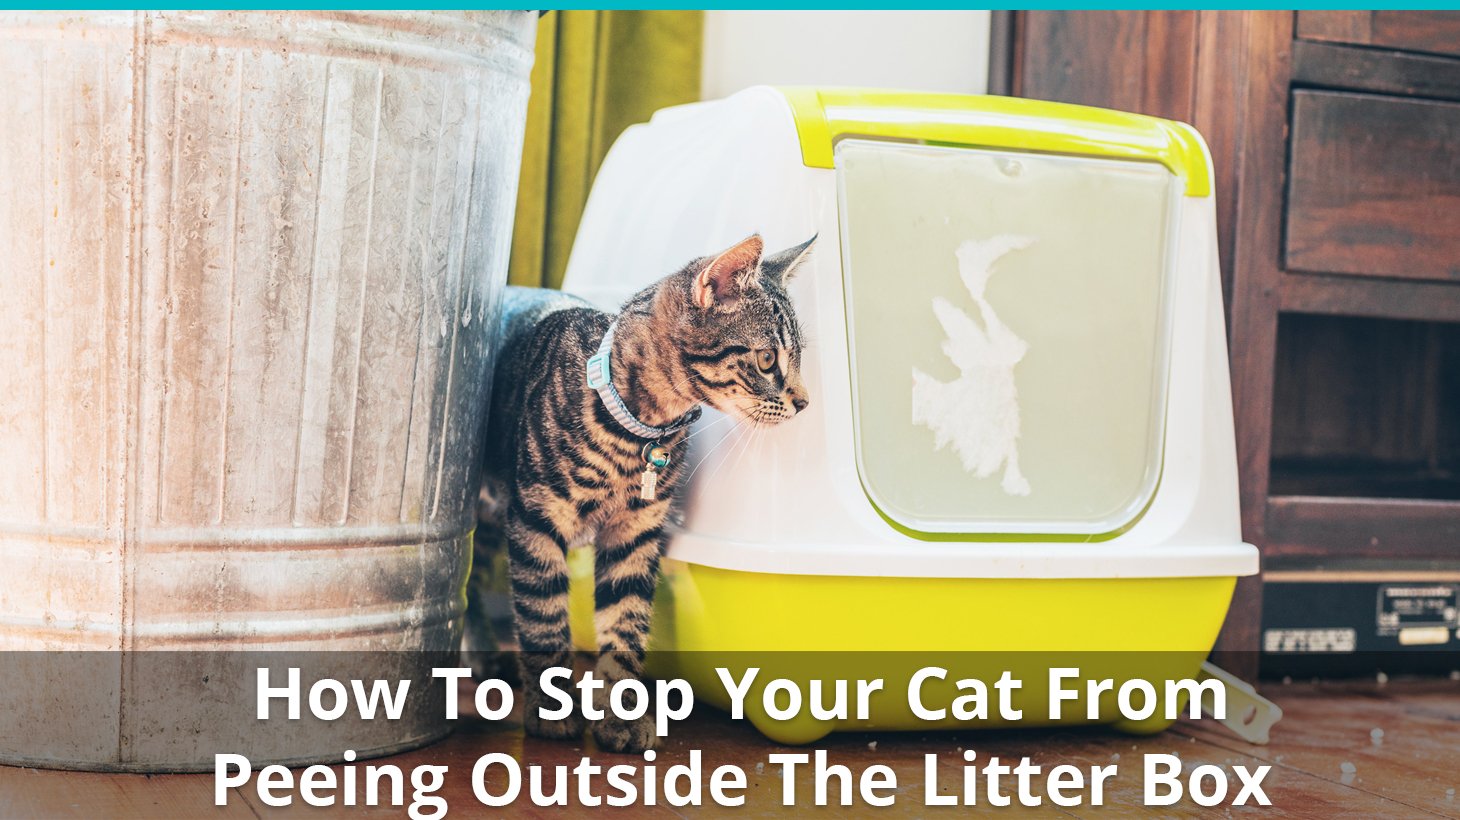 Here S How To Stop Your Cat Peeing Outside The Litter Box Tips Tricks,Cooking Ribs On A Skillet